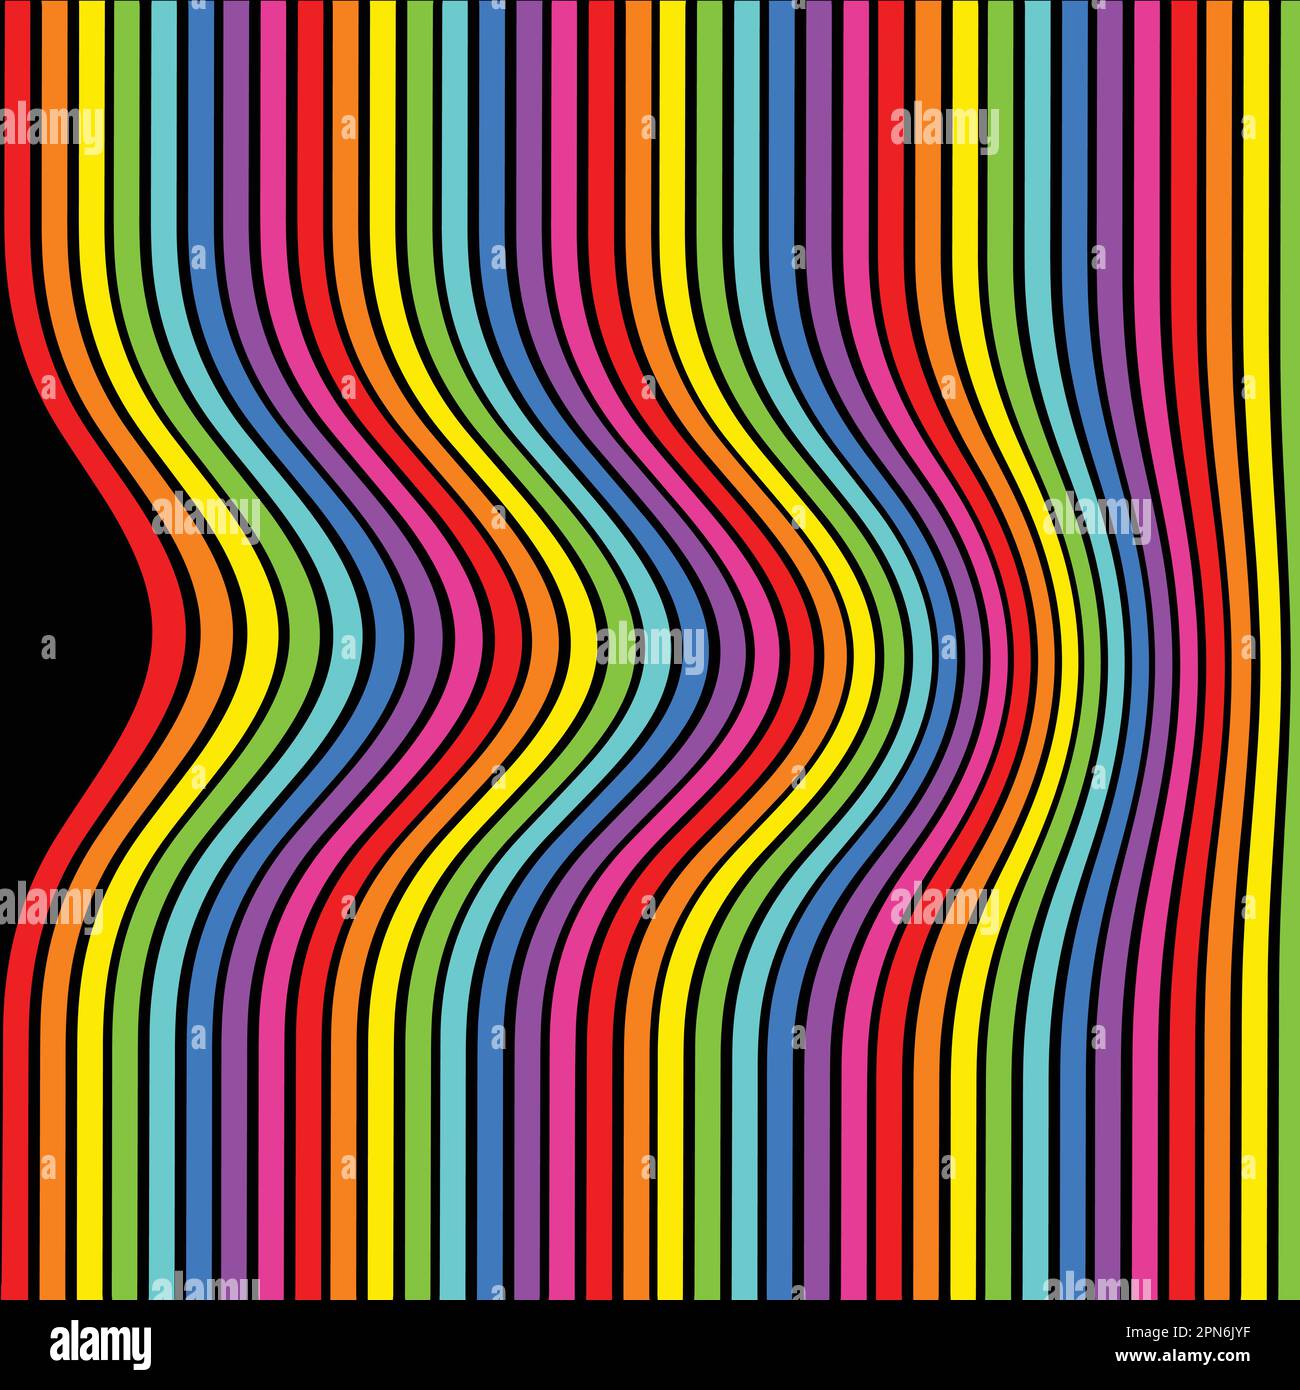 Abstract lines with a push effect. It looks as is something pushes the lines to the right. Rainbow colors with black. Stock Vector